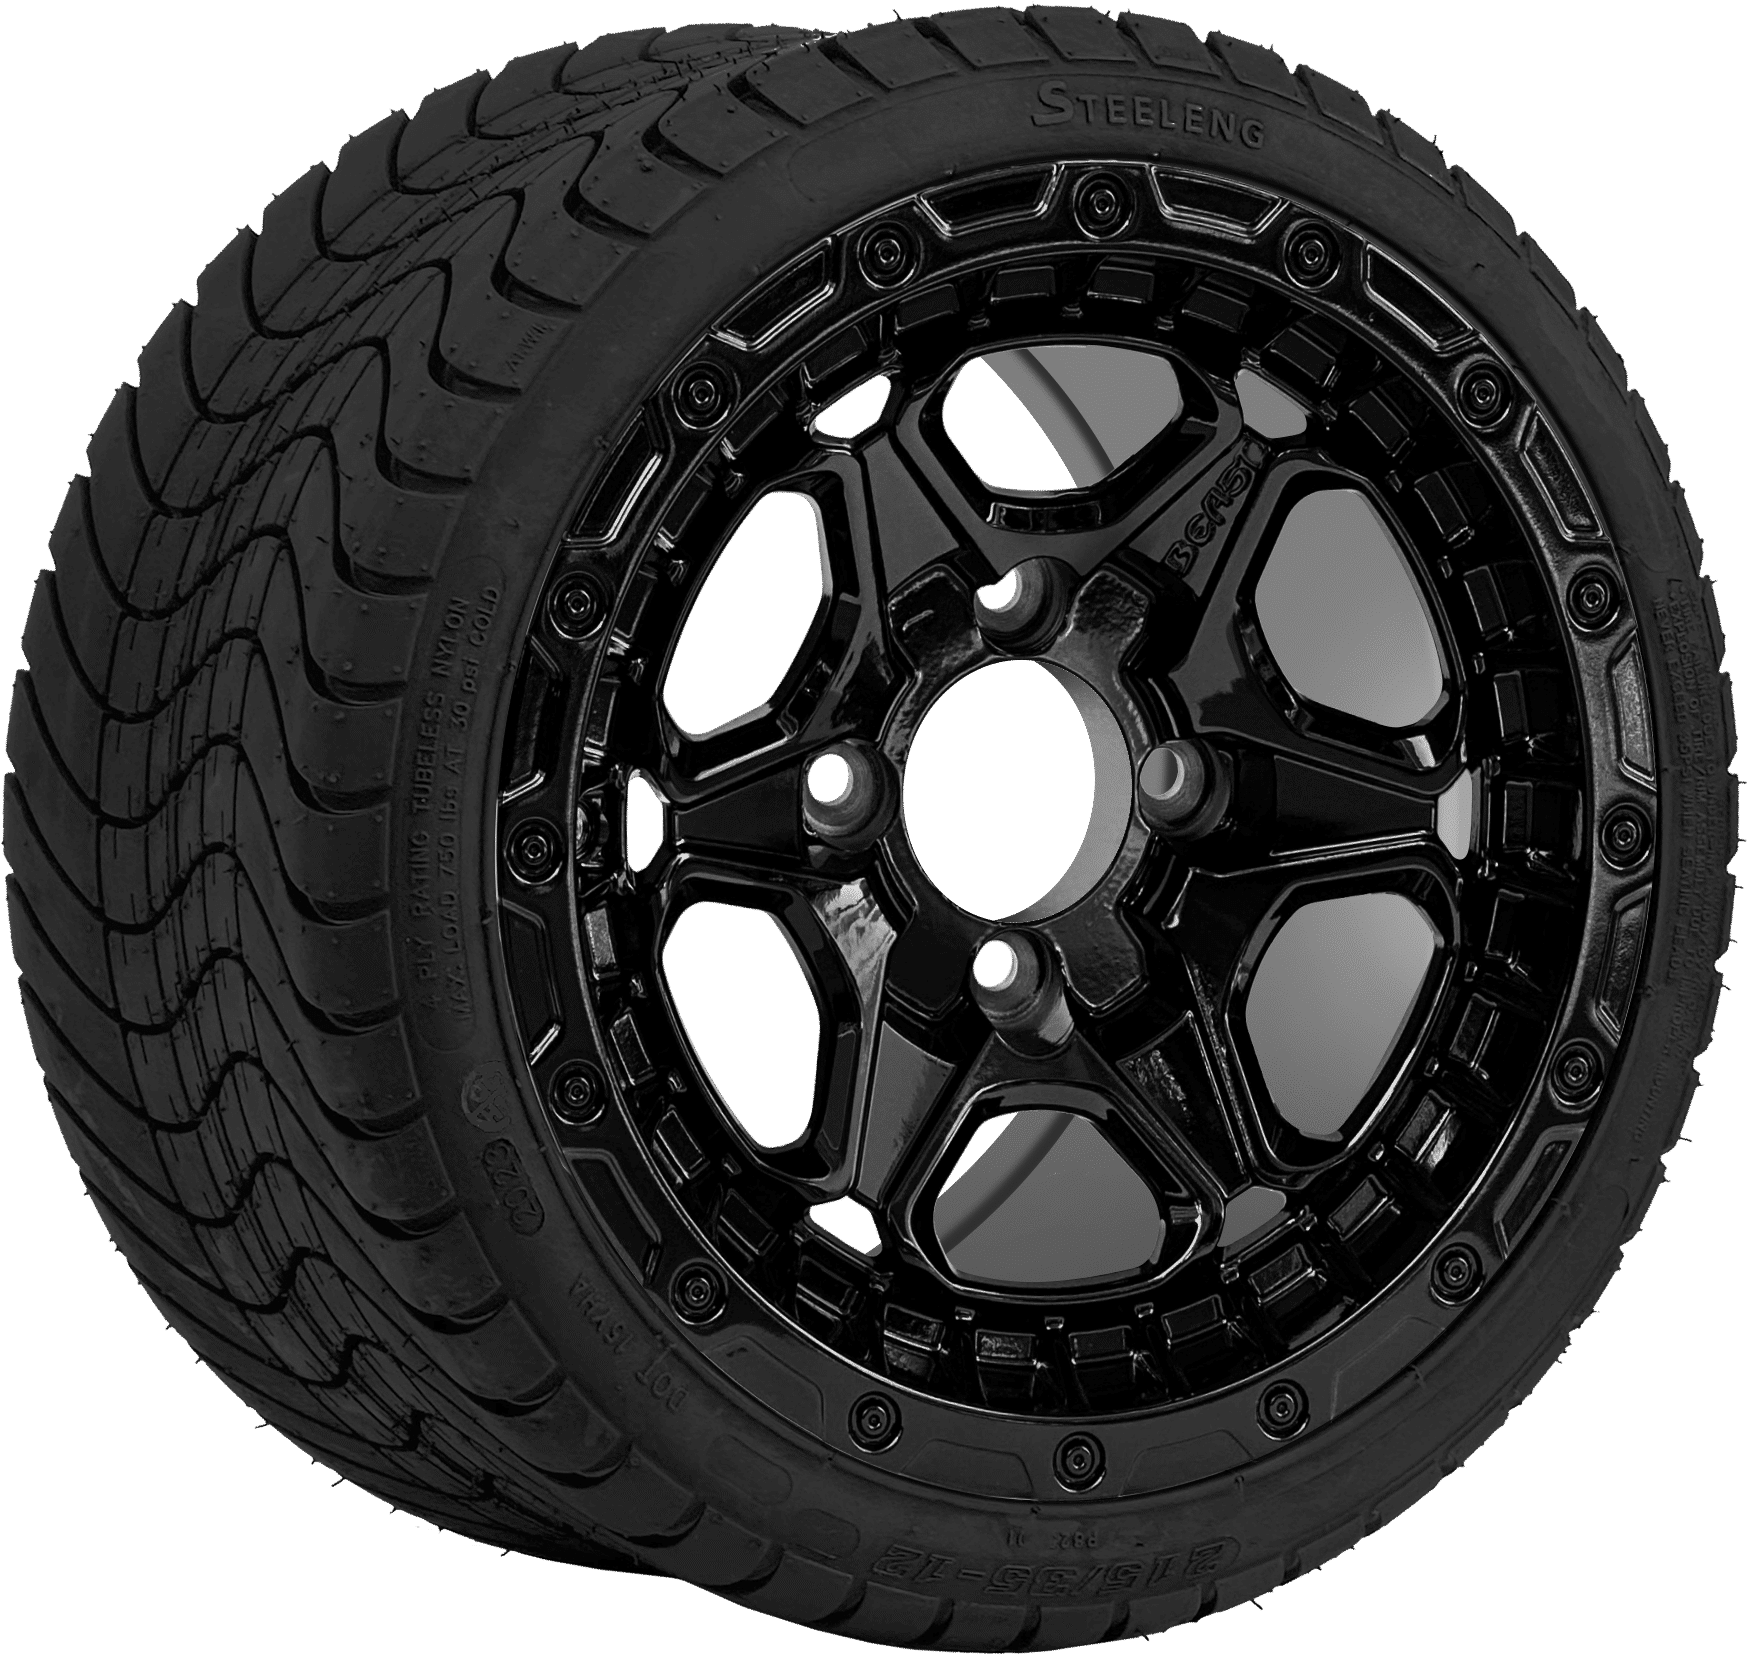 BNDL-TR1211-WH1264-CC0027-LN0002 12″ GRIZZLY GLOSSY BLACK WHEEL – ALUMINUM ALLOY / STEELENG 215/40-12 LOW PROFILE TIRE DOT APPROVED